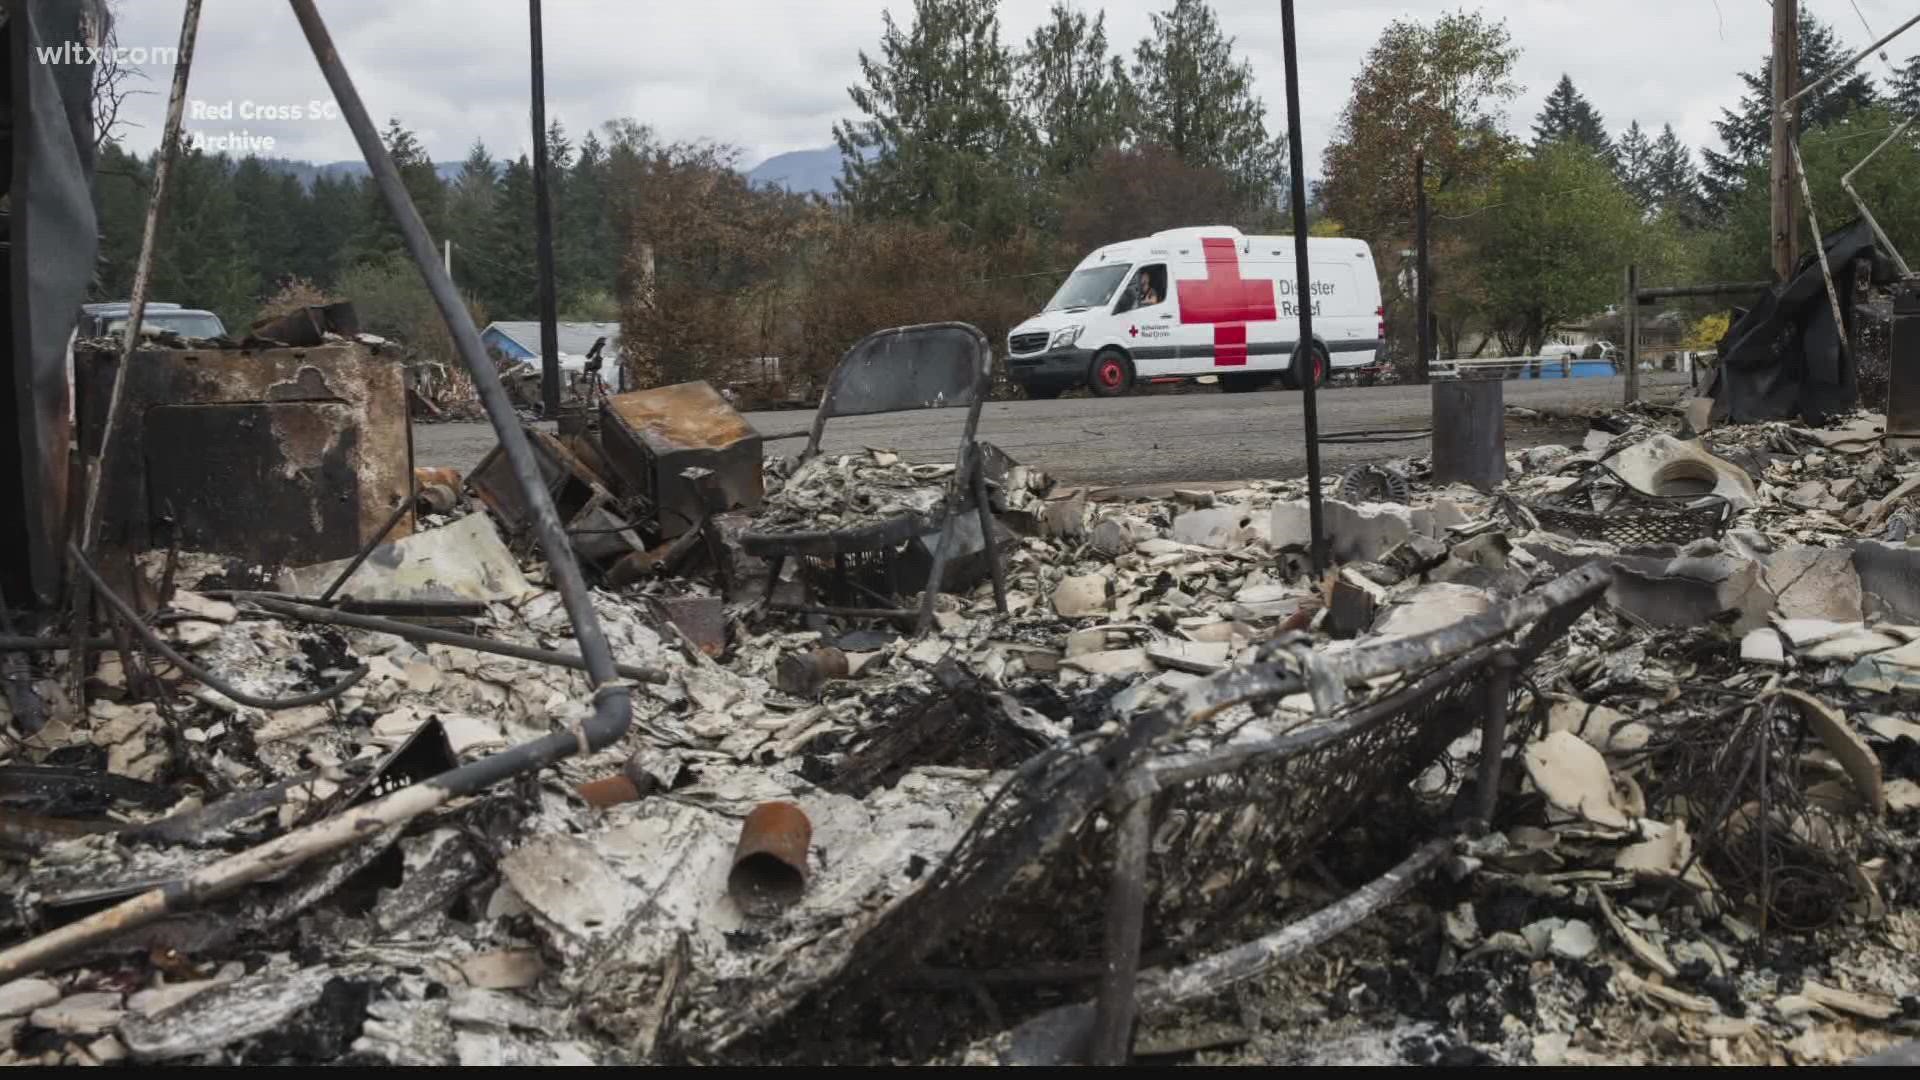 For many forced to evacuate their homes due to the California wildfires, shelters are on standby. Red Cross SC volunteers are there to help coordinate these efforts.